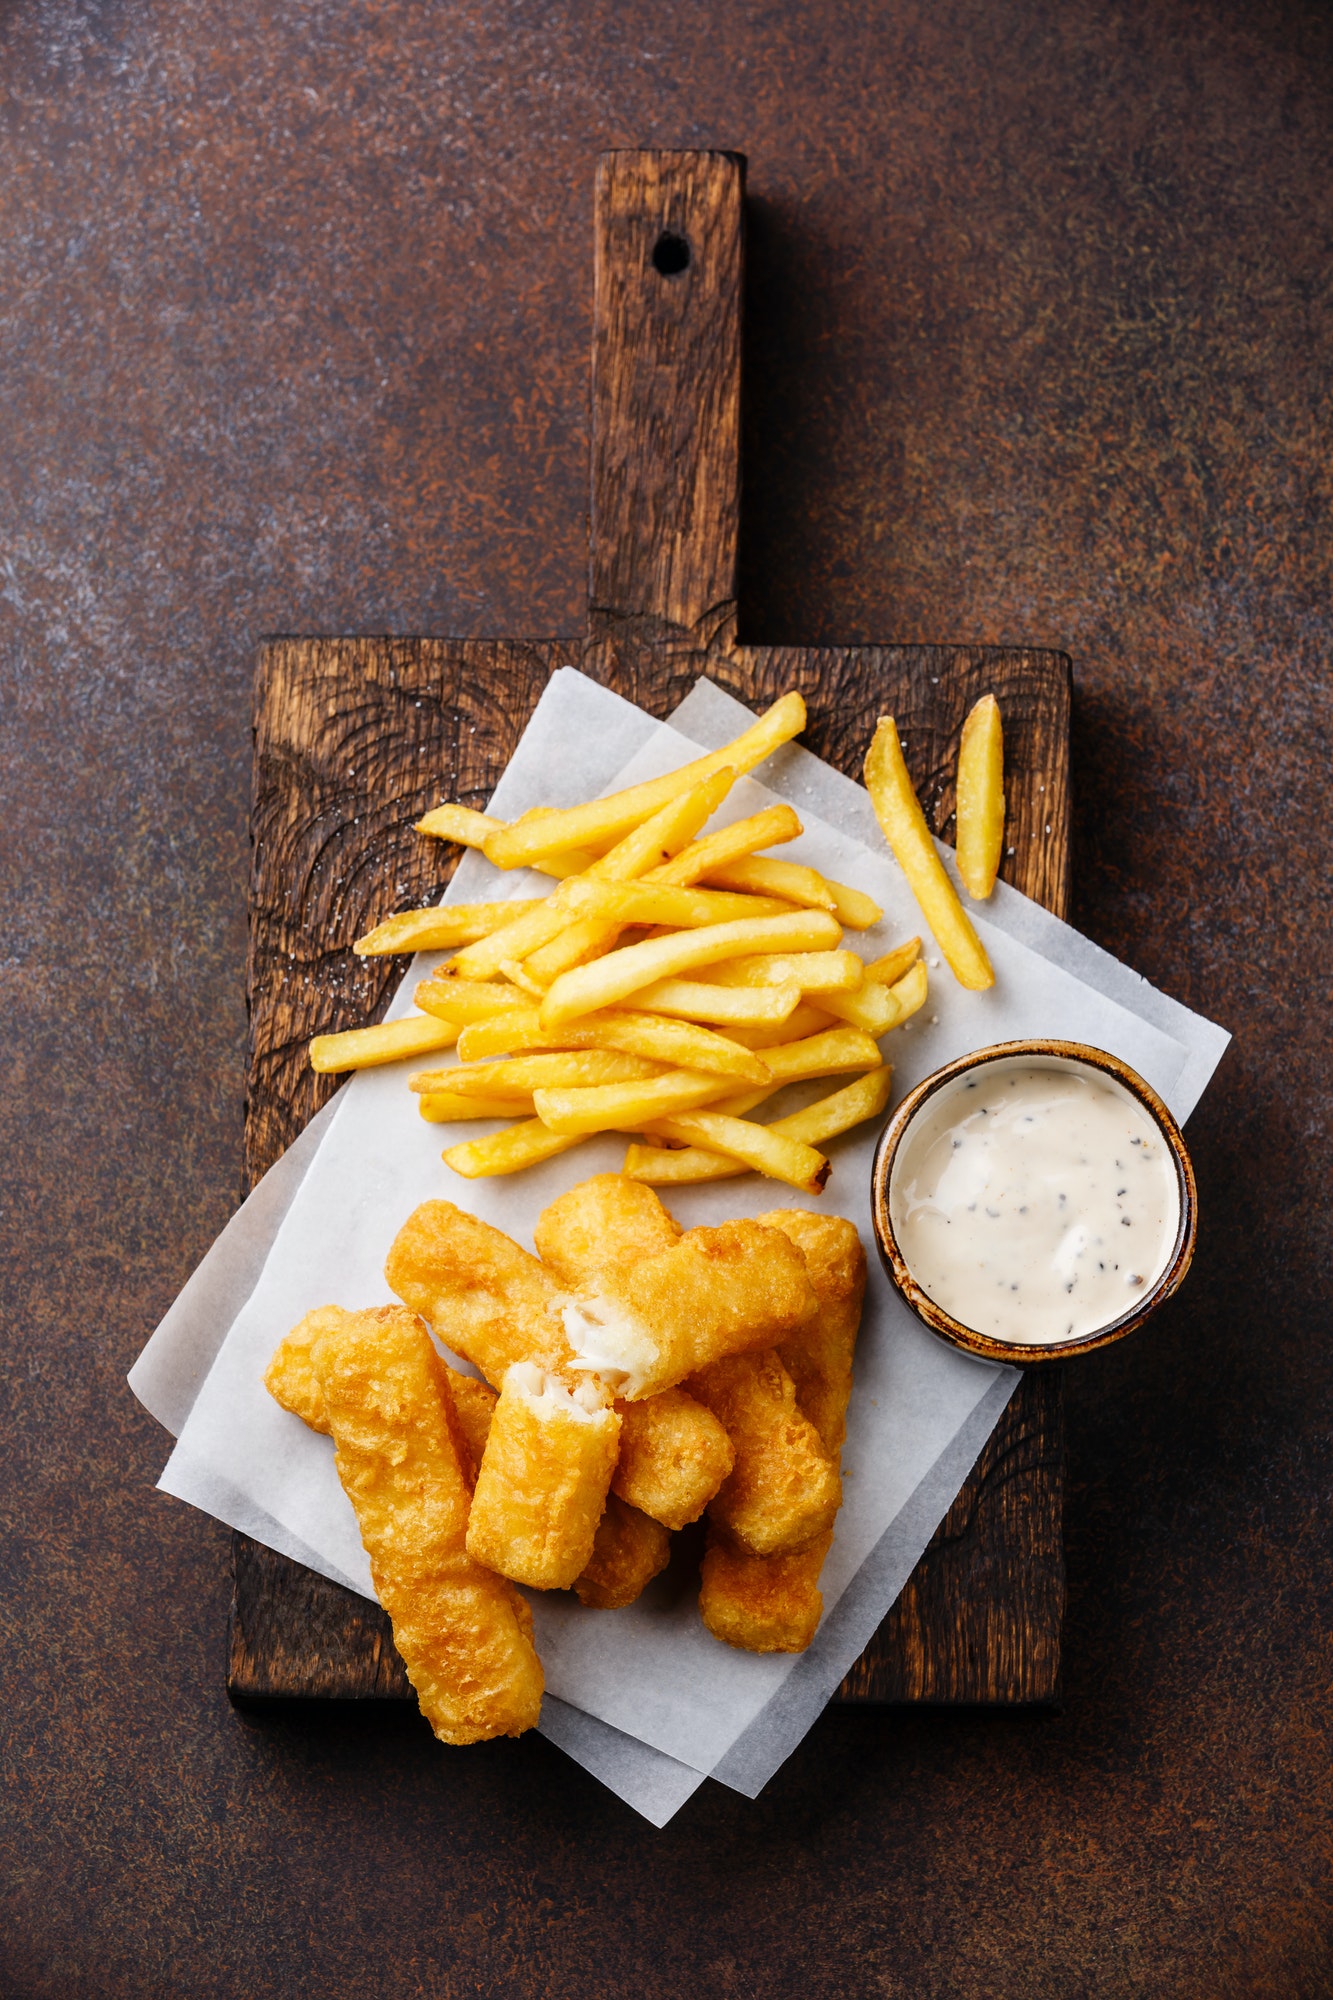 Fish fingers and Chips british fast food with tartar sauce on dark background